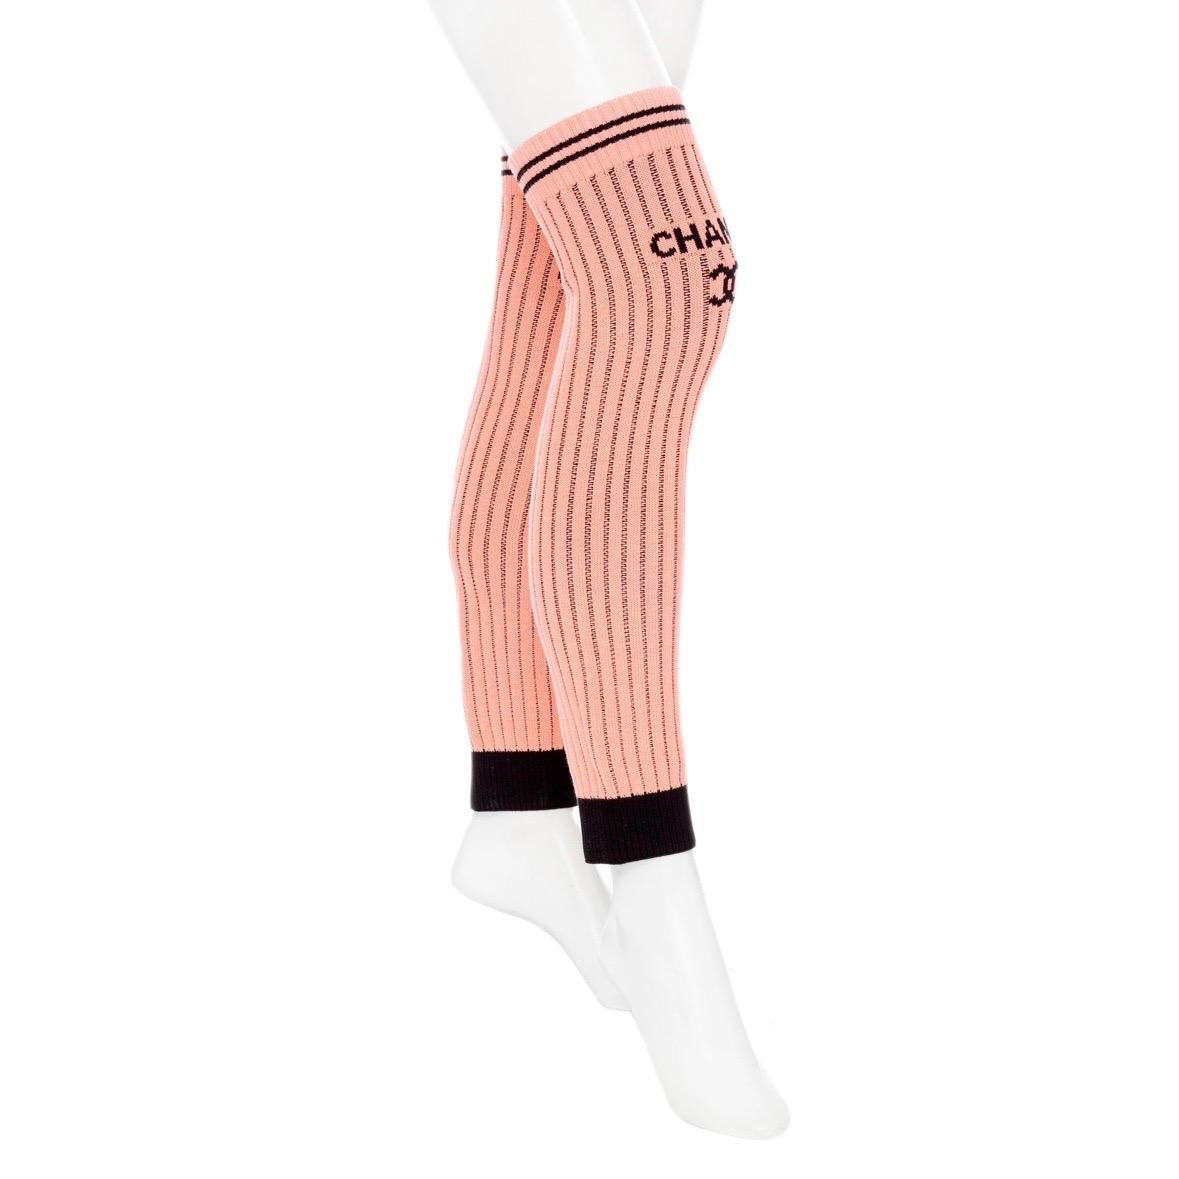 Chanel Pink and Black Striped Knit Gaiters

2023/4 Cruise Collection
Pink and Black
Ribbed knit texture
Interlocking CC and logo
Fits snug or slouchy
81% Viscose, 19% Polyester; 70% Viscose, 16% Polyester, 12% Nylon, 2% Spandex Combo
Excellent